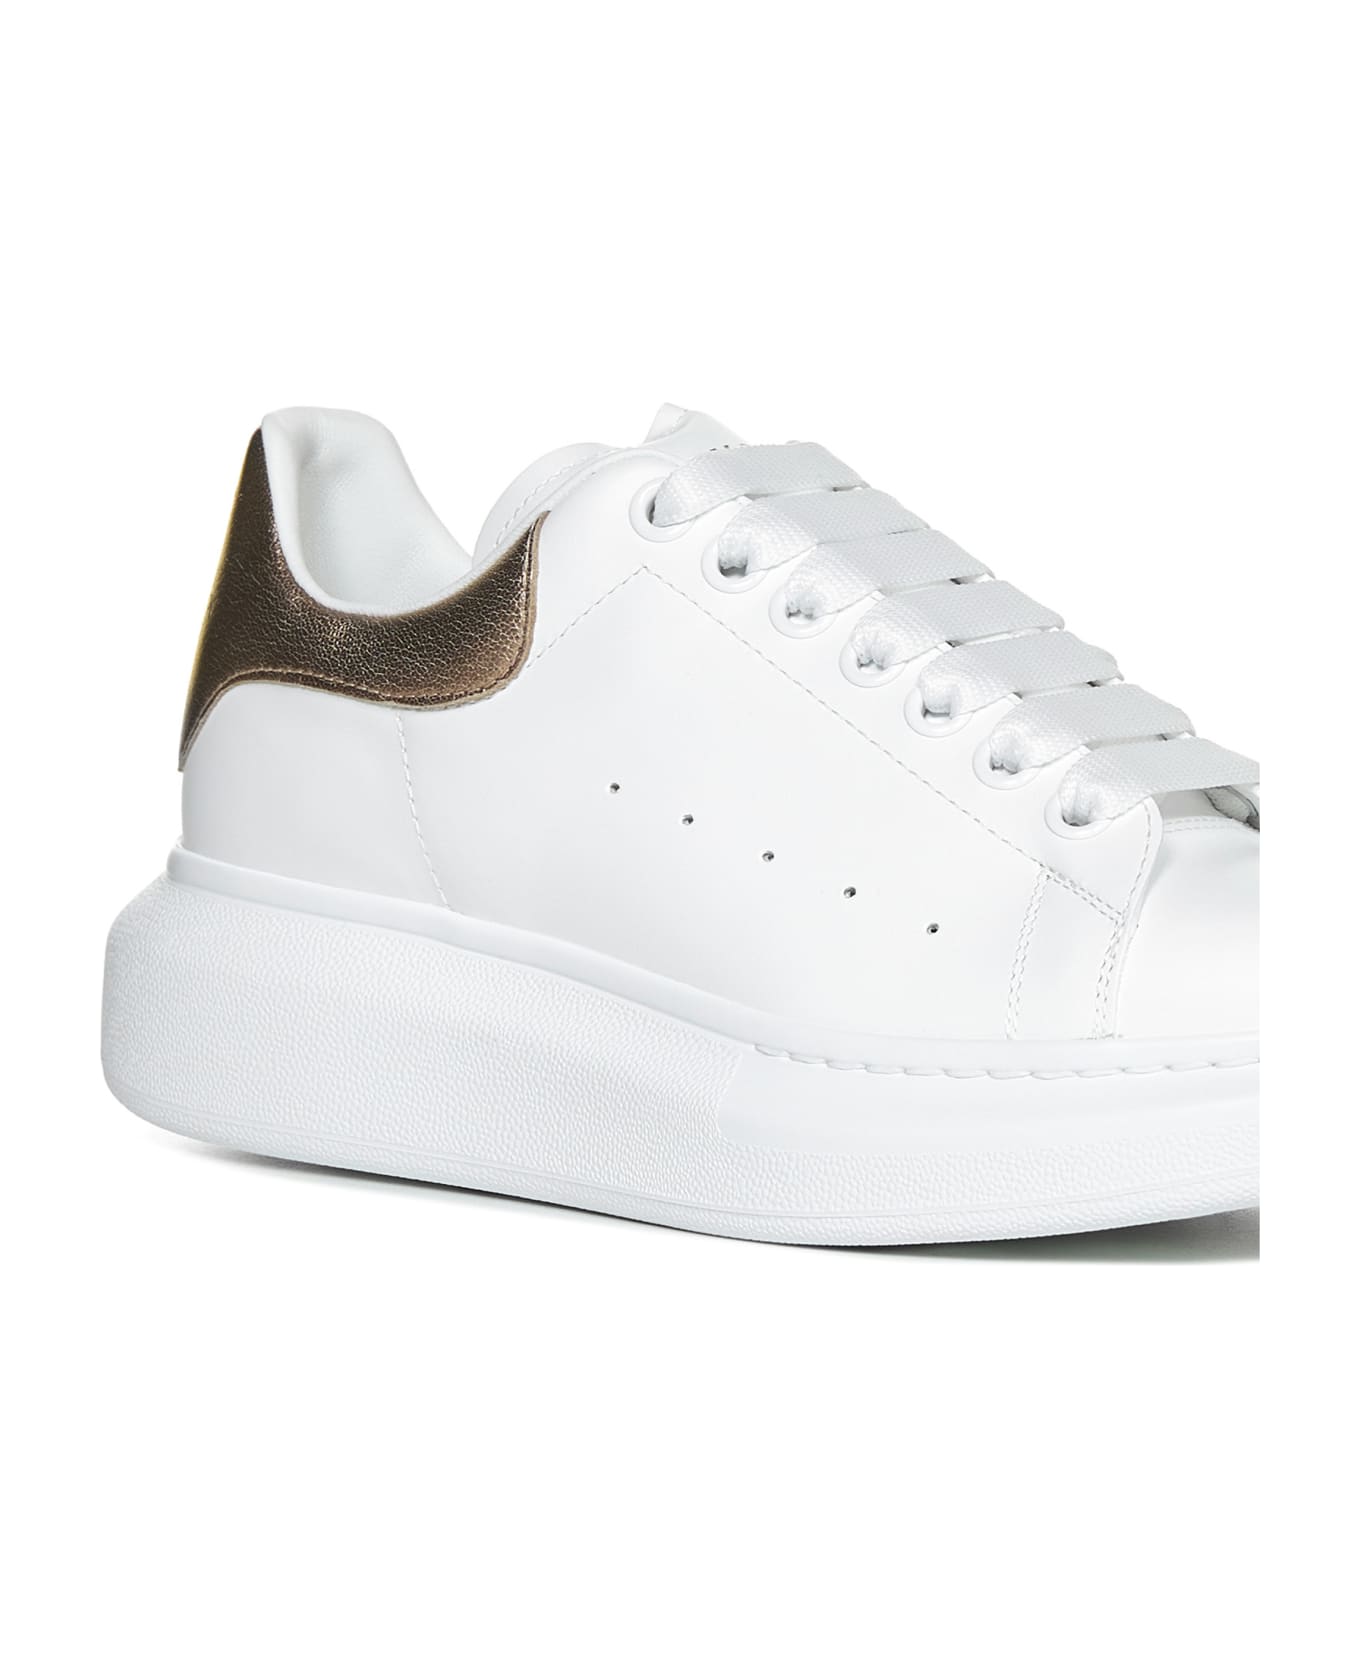 Alexander McQueen Oversized Leather Sneakers - White/rose Gold 171 スニーカー